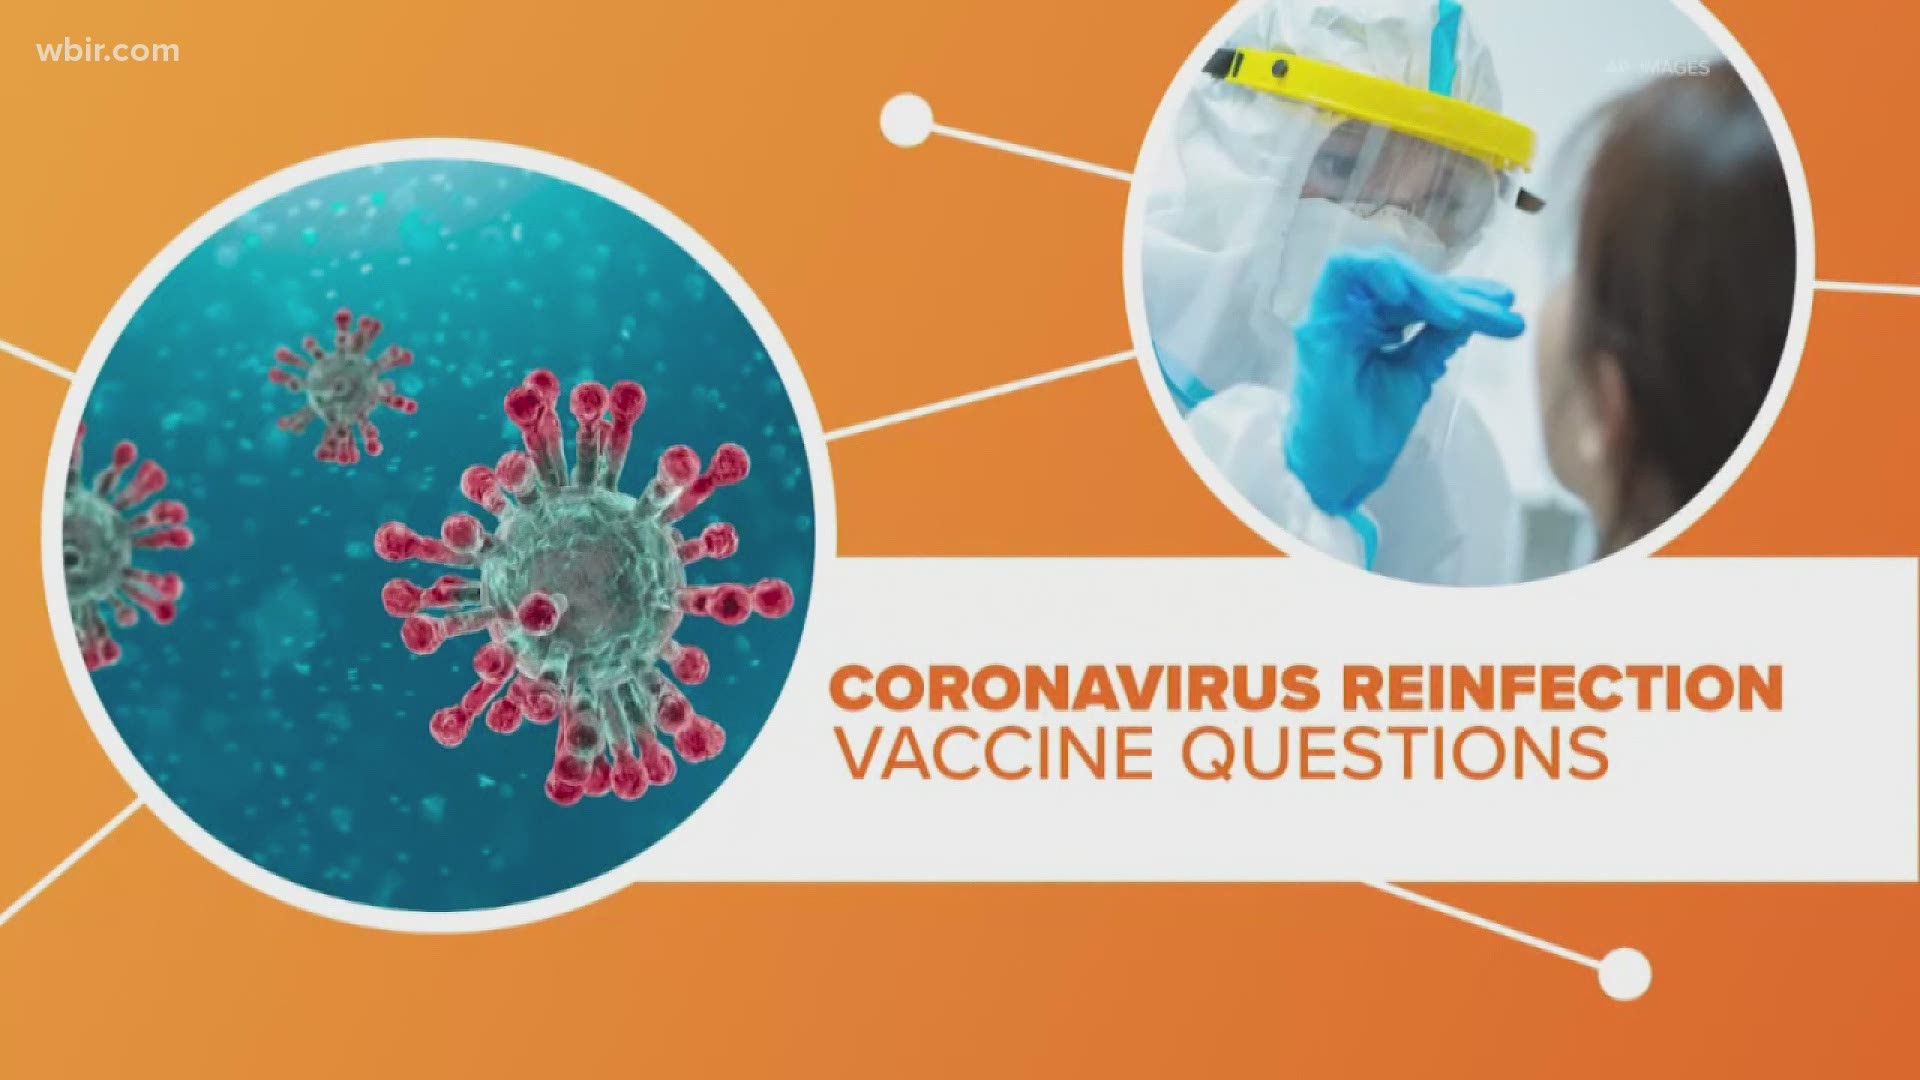 The case of a Nevada man who was reinfected with coronavirus is raising new questions about vaccine but the experts say not to worry. Let's connect the dots.